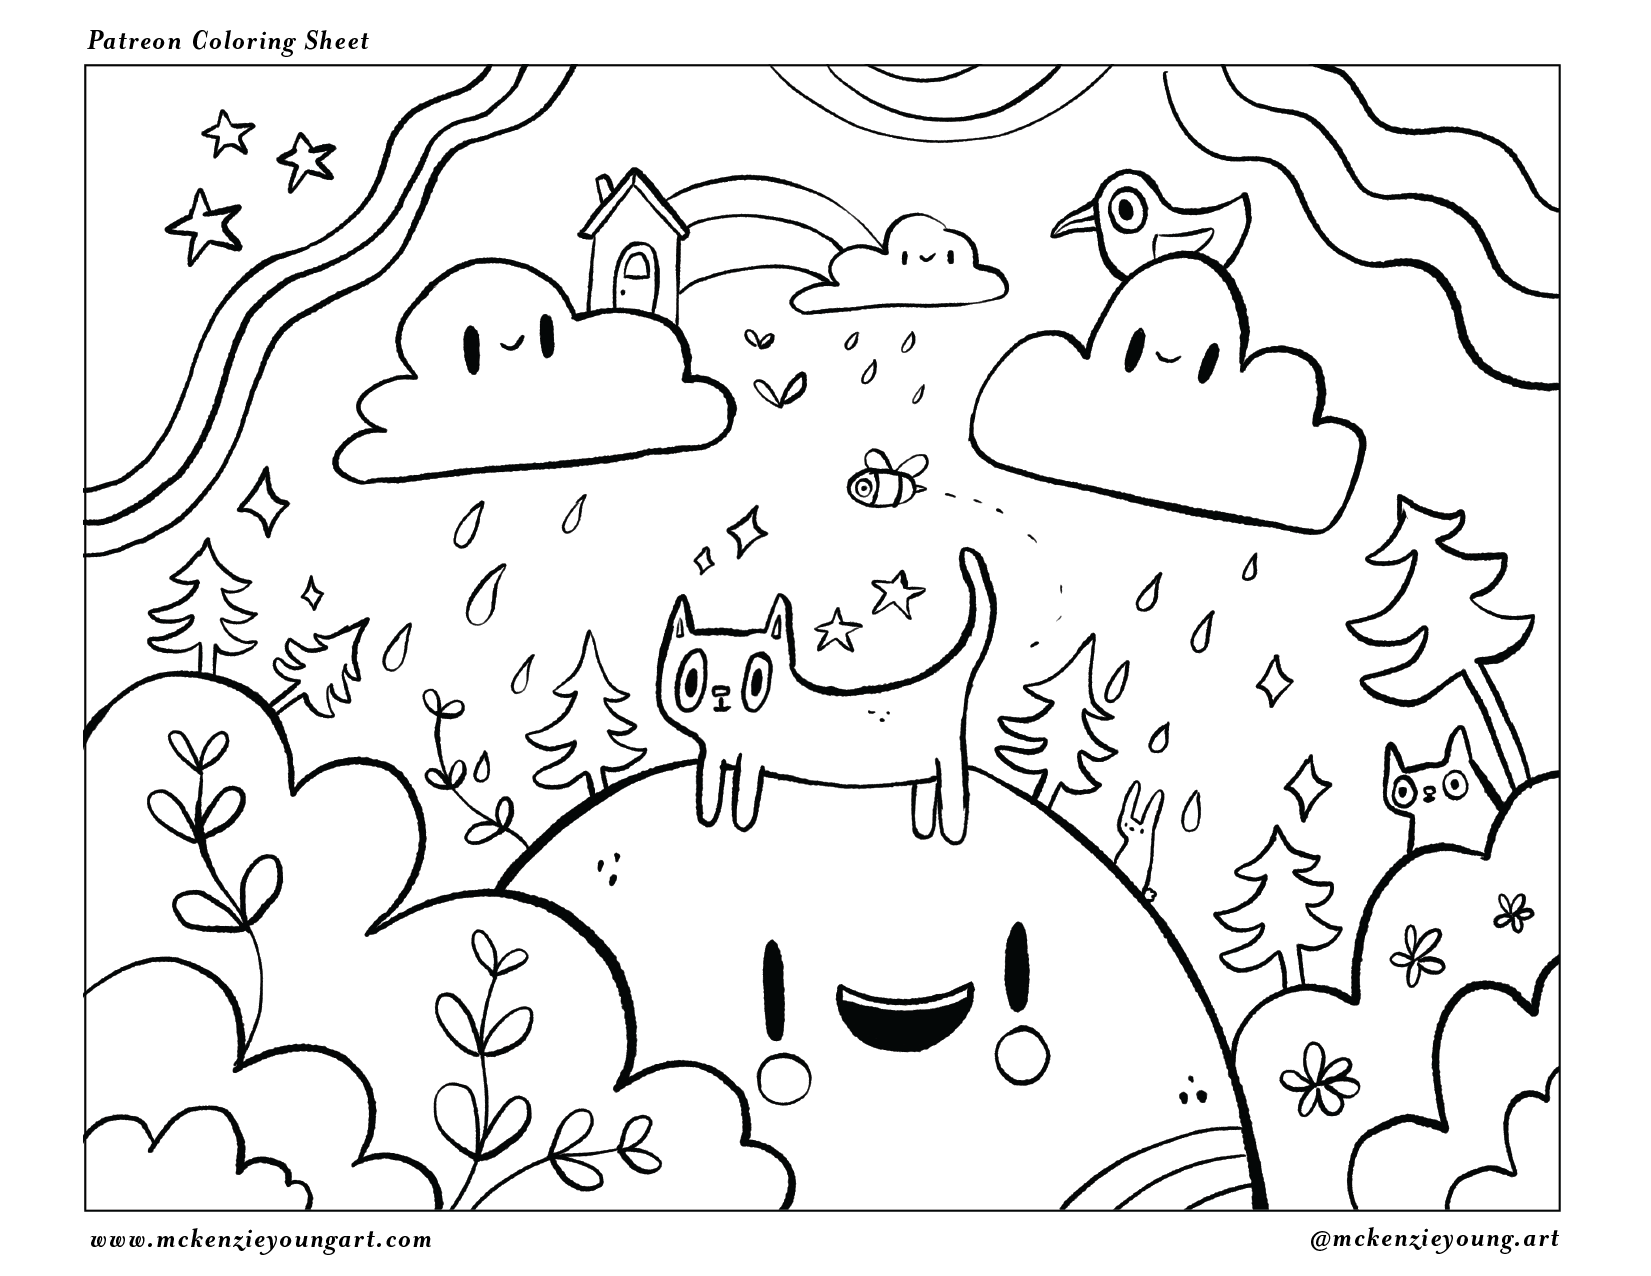 february-2022-coloringpage-02.png